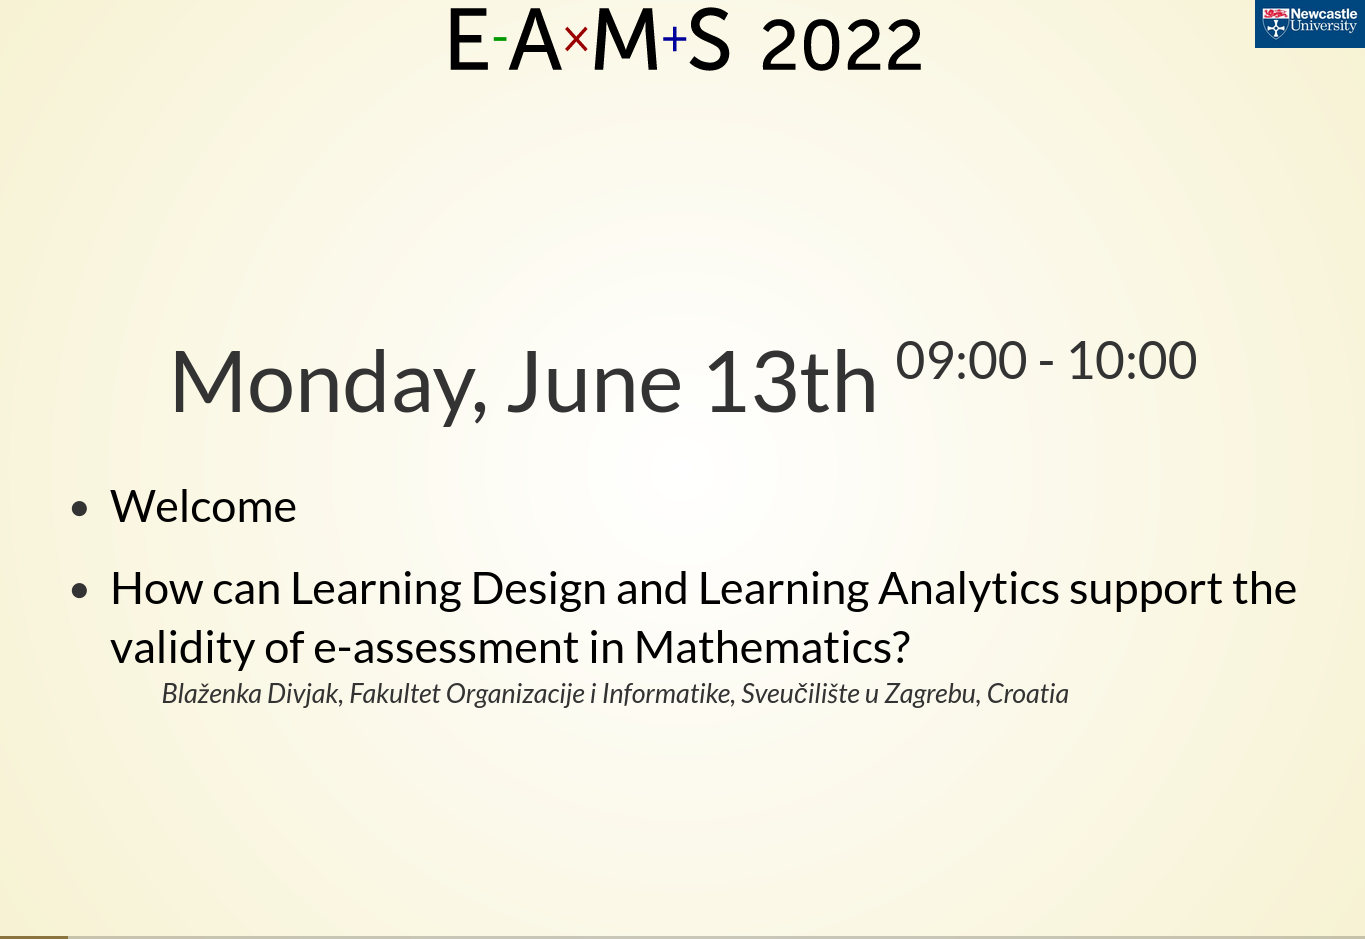 A presentation slide. At the top is the EAMS 2022 logo. The content reads "Monday, June 13th 09:00-10:00. Welcome. How can Learning Design and Learning Analytics support the validity of e-assessment in Mathematics? Blaženka Divjak, Fakultet Organizacije i Informatike, Sveučilište u Zagrebu, Croatia.